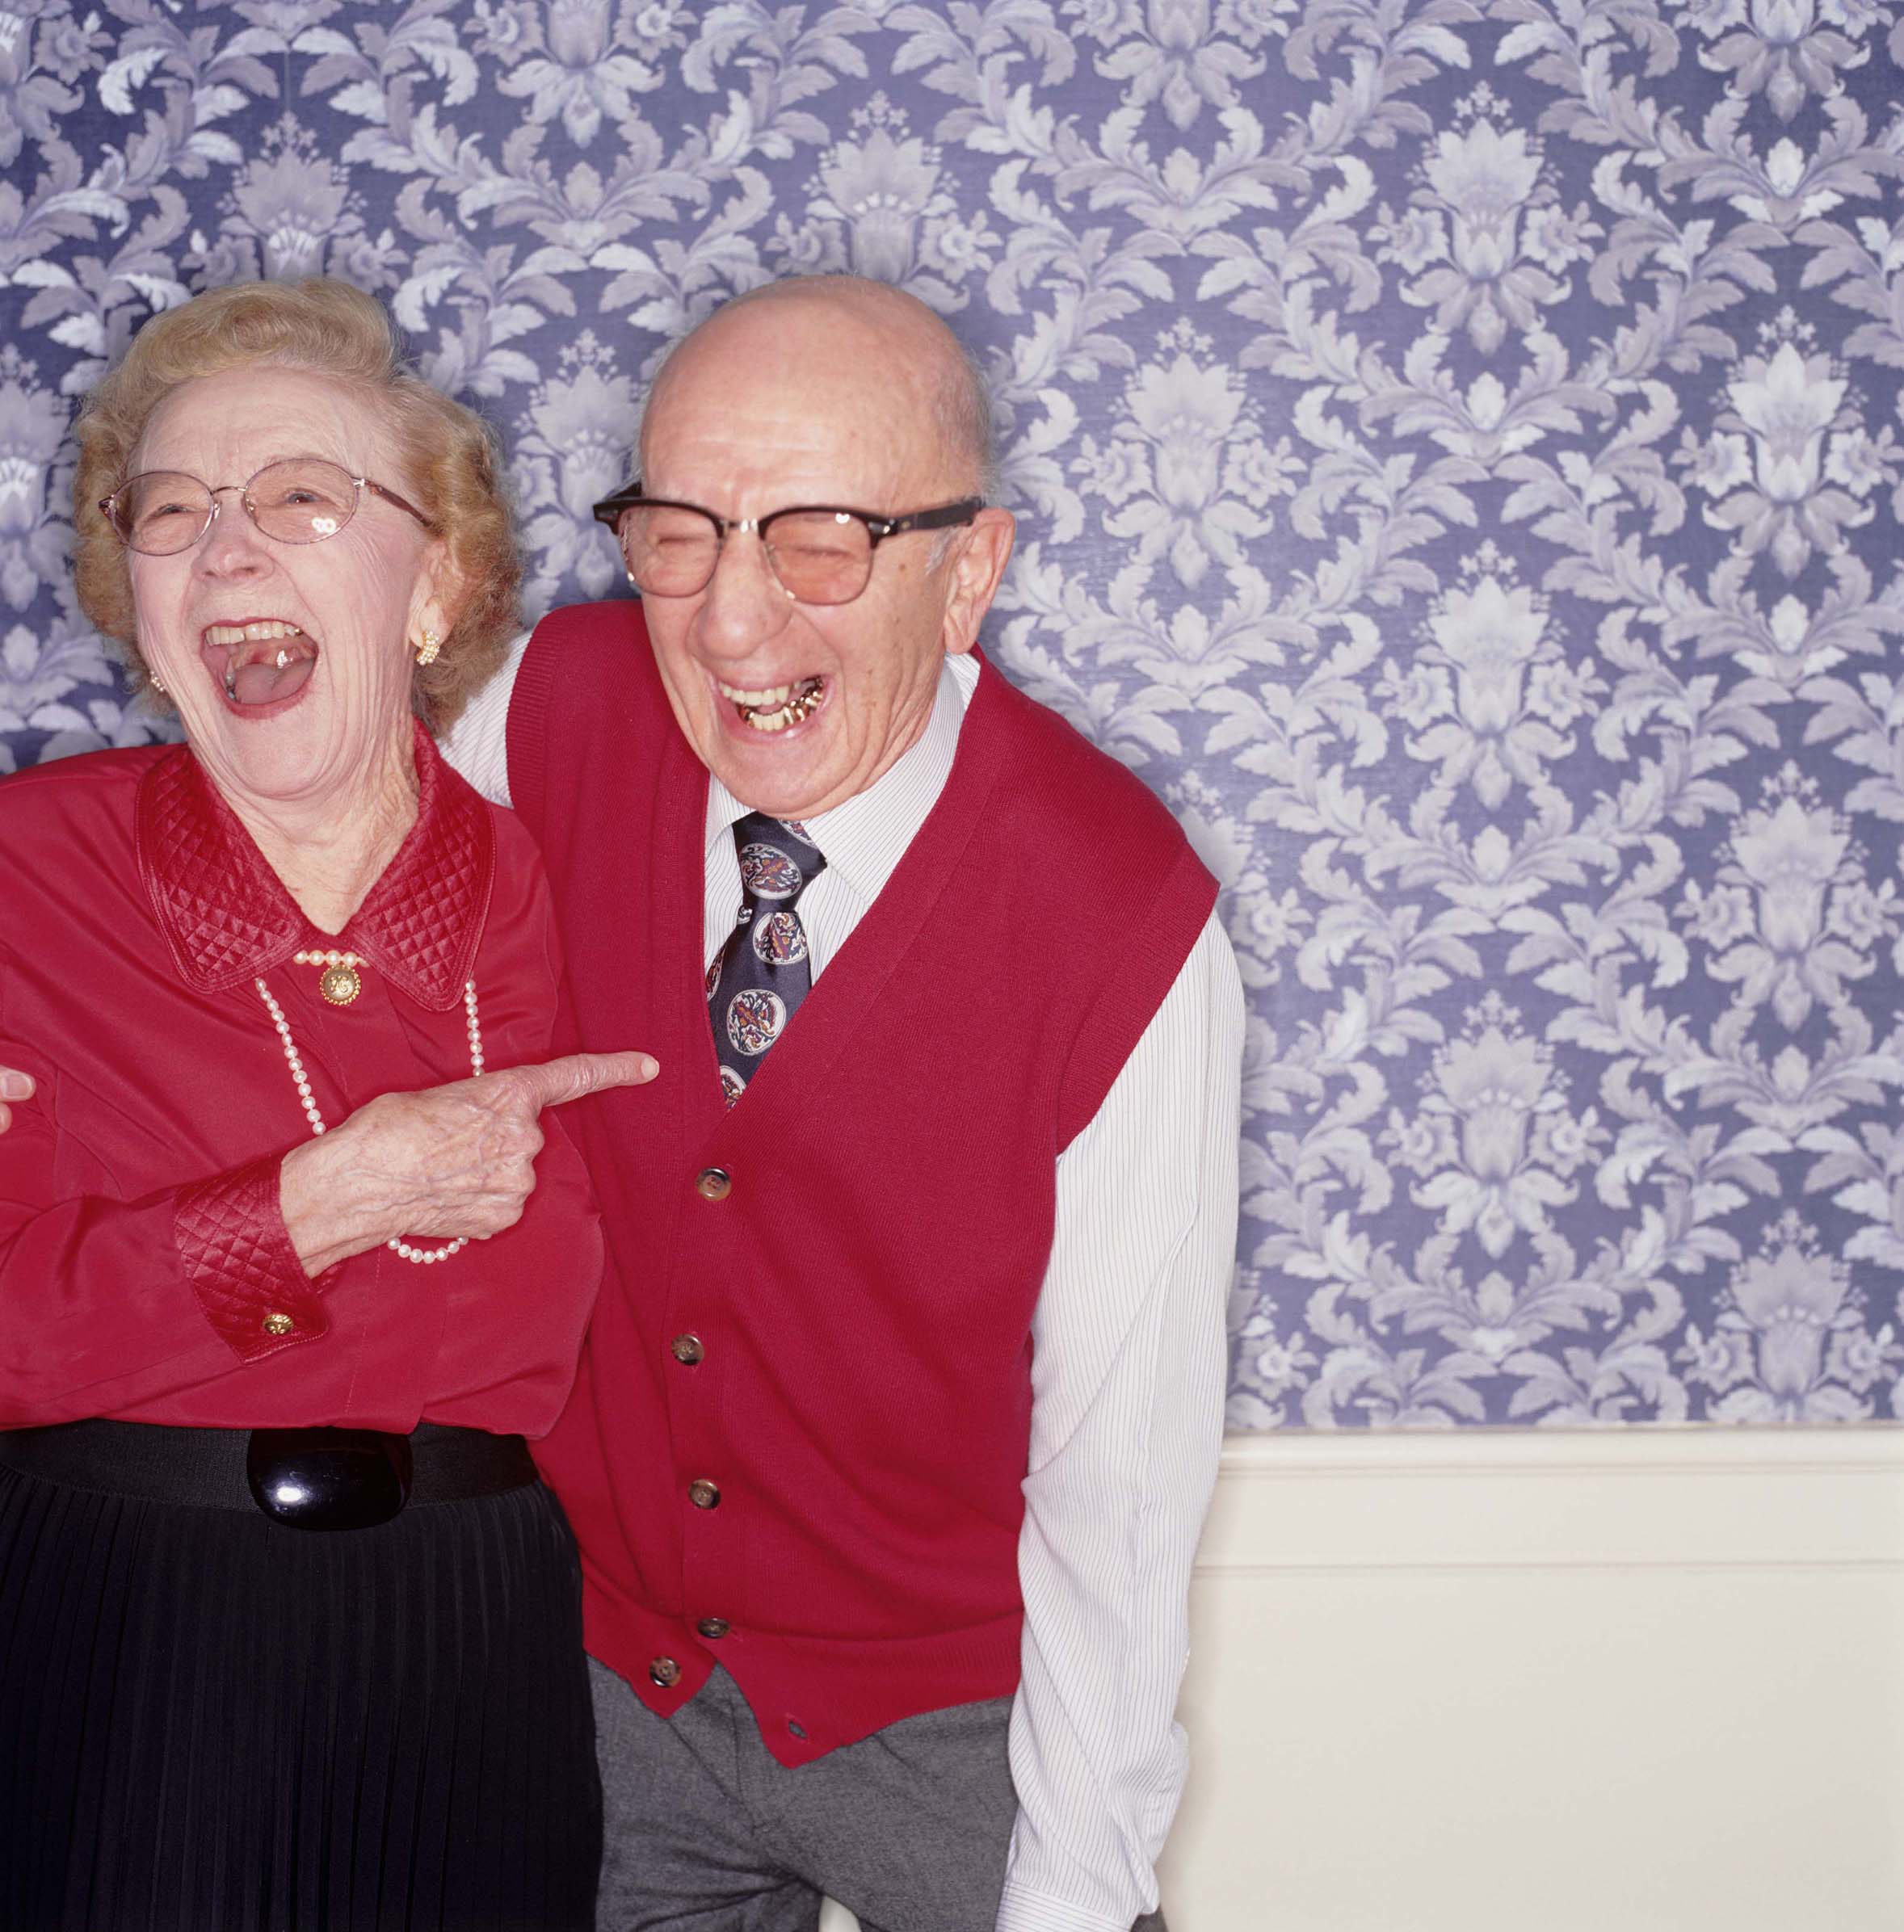 A senior couple laughing arm-in-arm